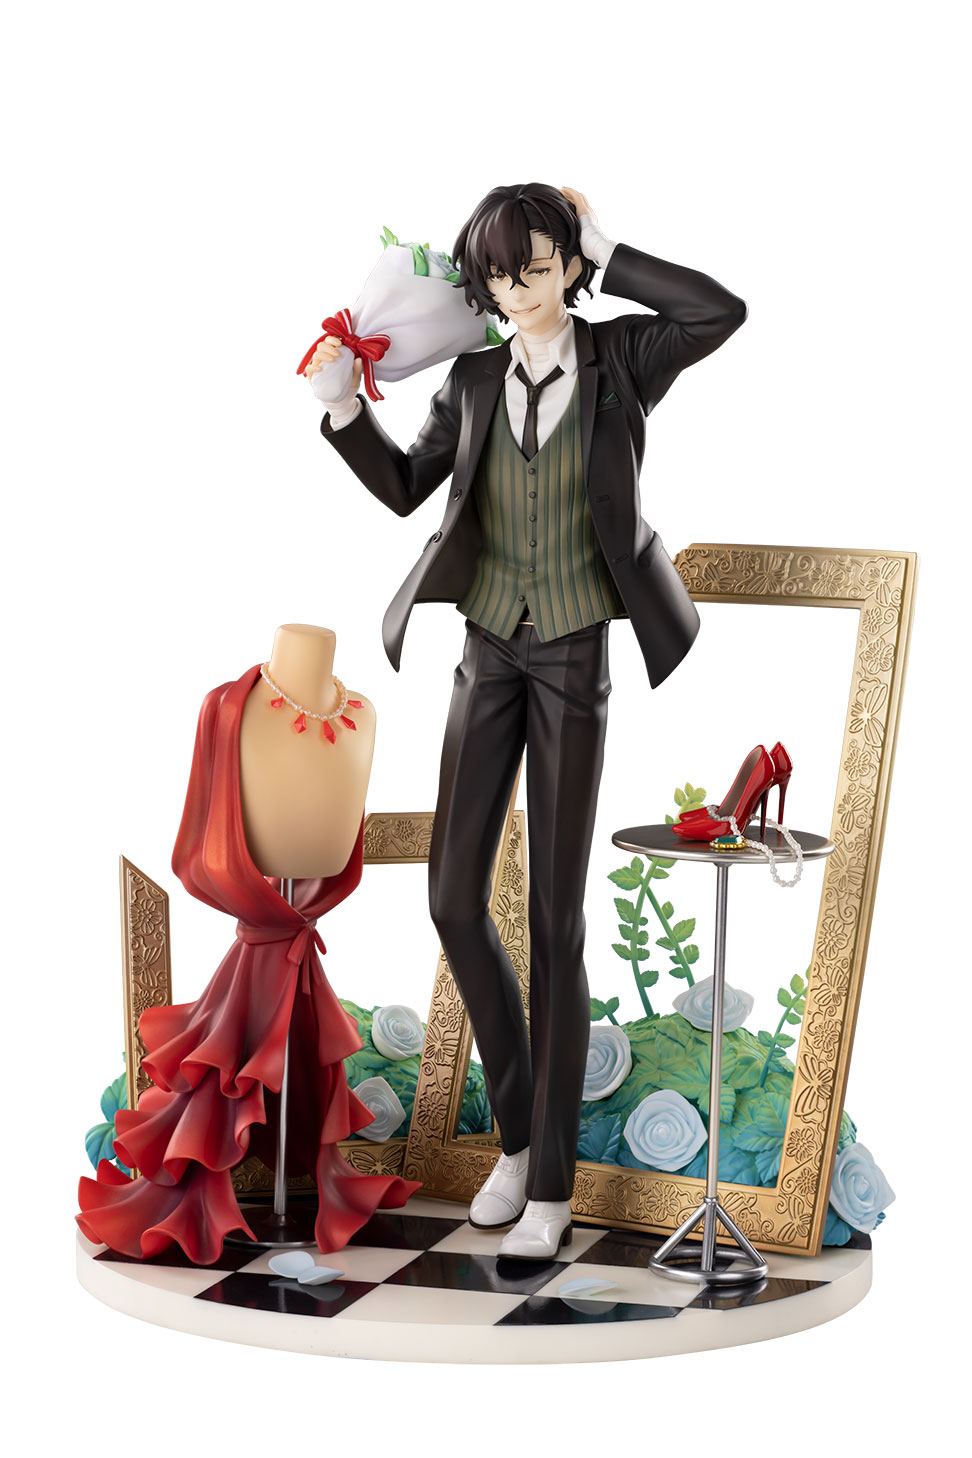 Bungo Stray Dogs Tales of the Lost 1/8 Scale Pre-Painted Figure: Dazai Osamu Dress Up Ver. (Deluxe Edition) Hobbymax